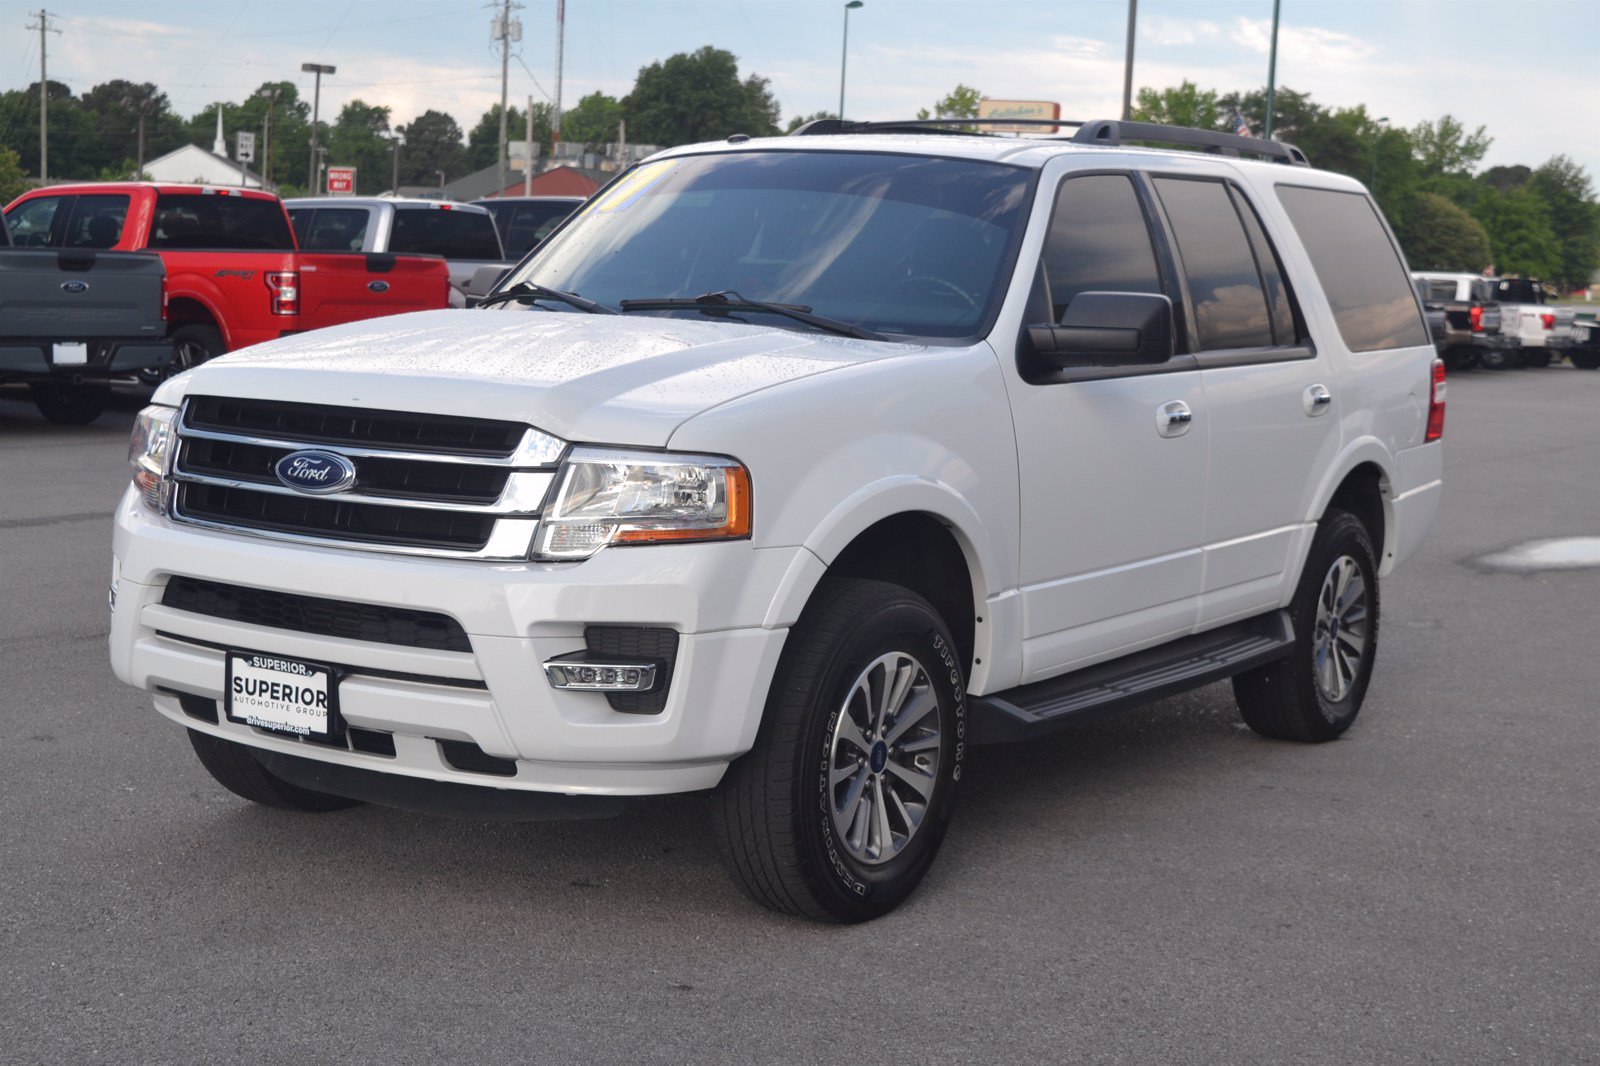 Pre-Owned 2017 Ford Expedition XLT Sport Utility in Fayetteville #